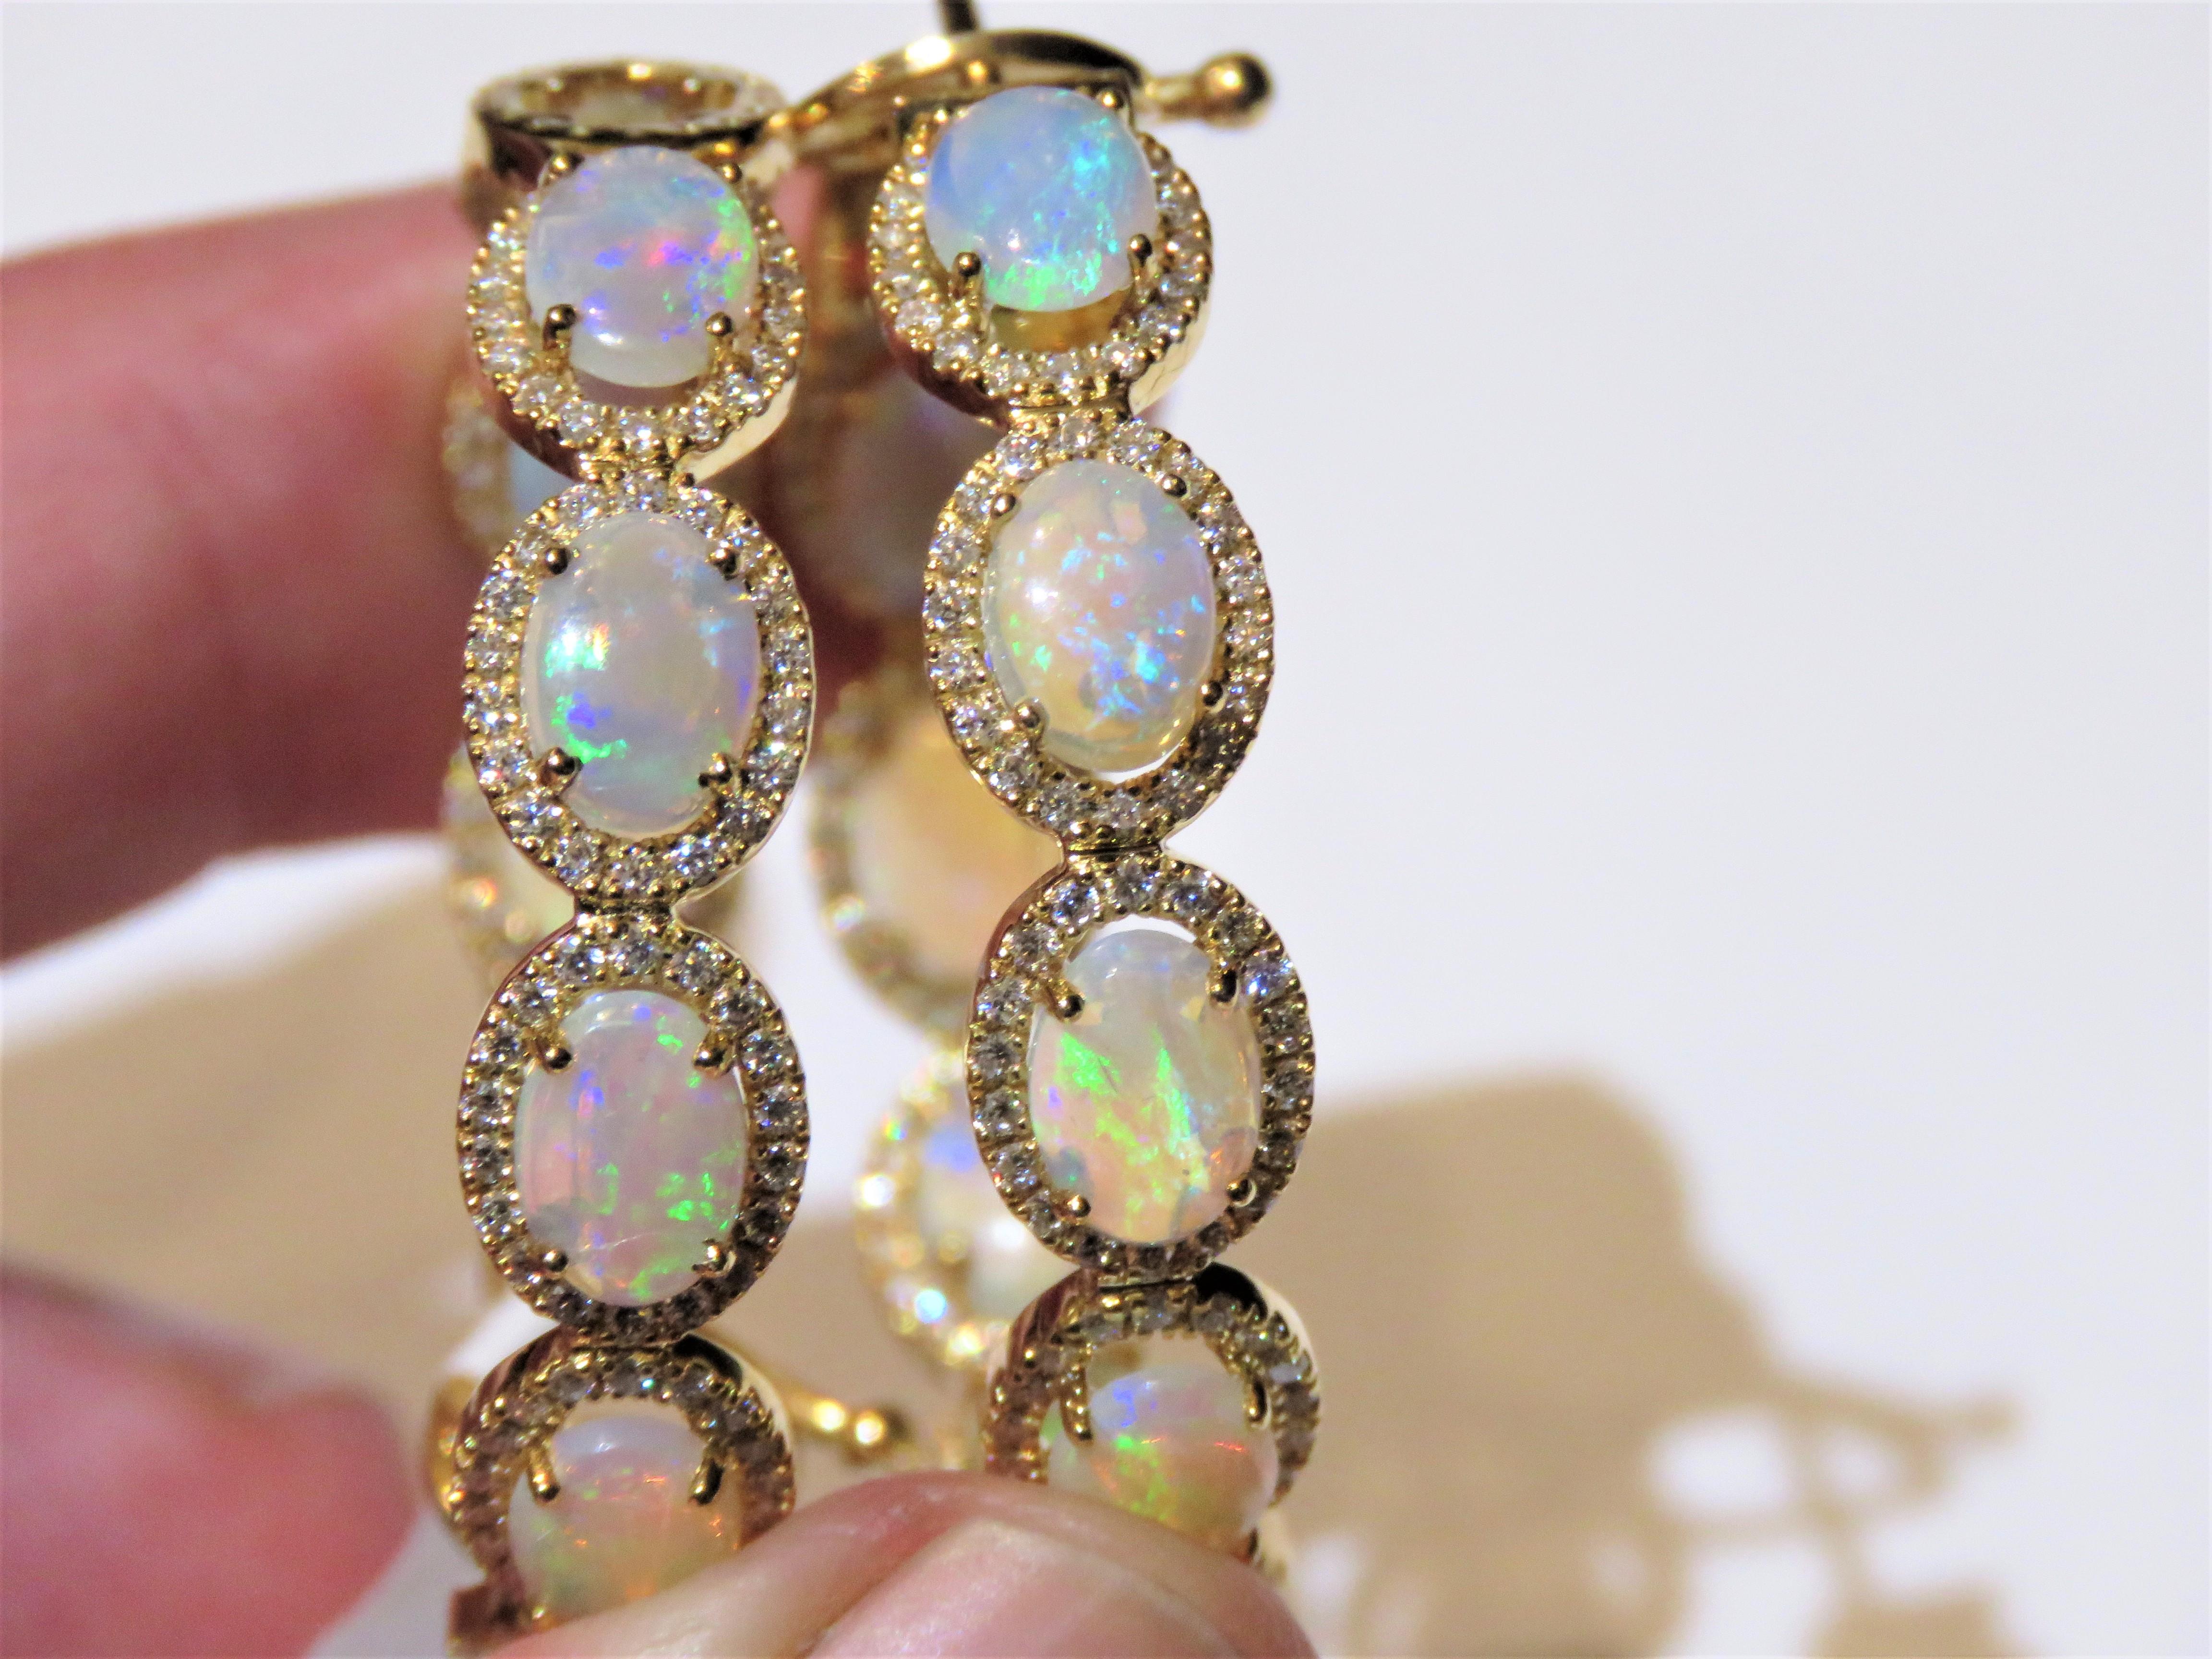 The Following Items we are offering is a Rare Important Spectacular and Brilliant 18KT Gold Large Gorgeous Fancy Opal and Diamond Dangle Hoop Earrings. Earrings consists of Rare Fine Magnificent White Ethiopian Opals surrounded and Framed with